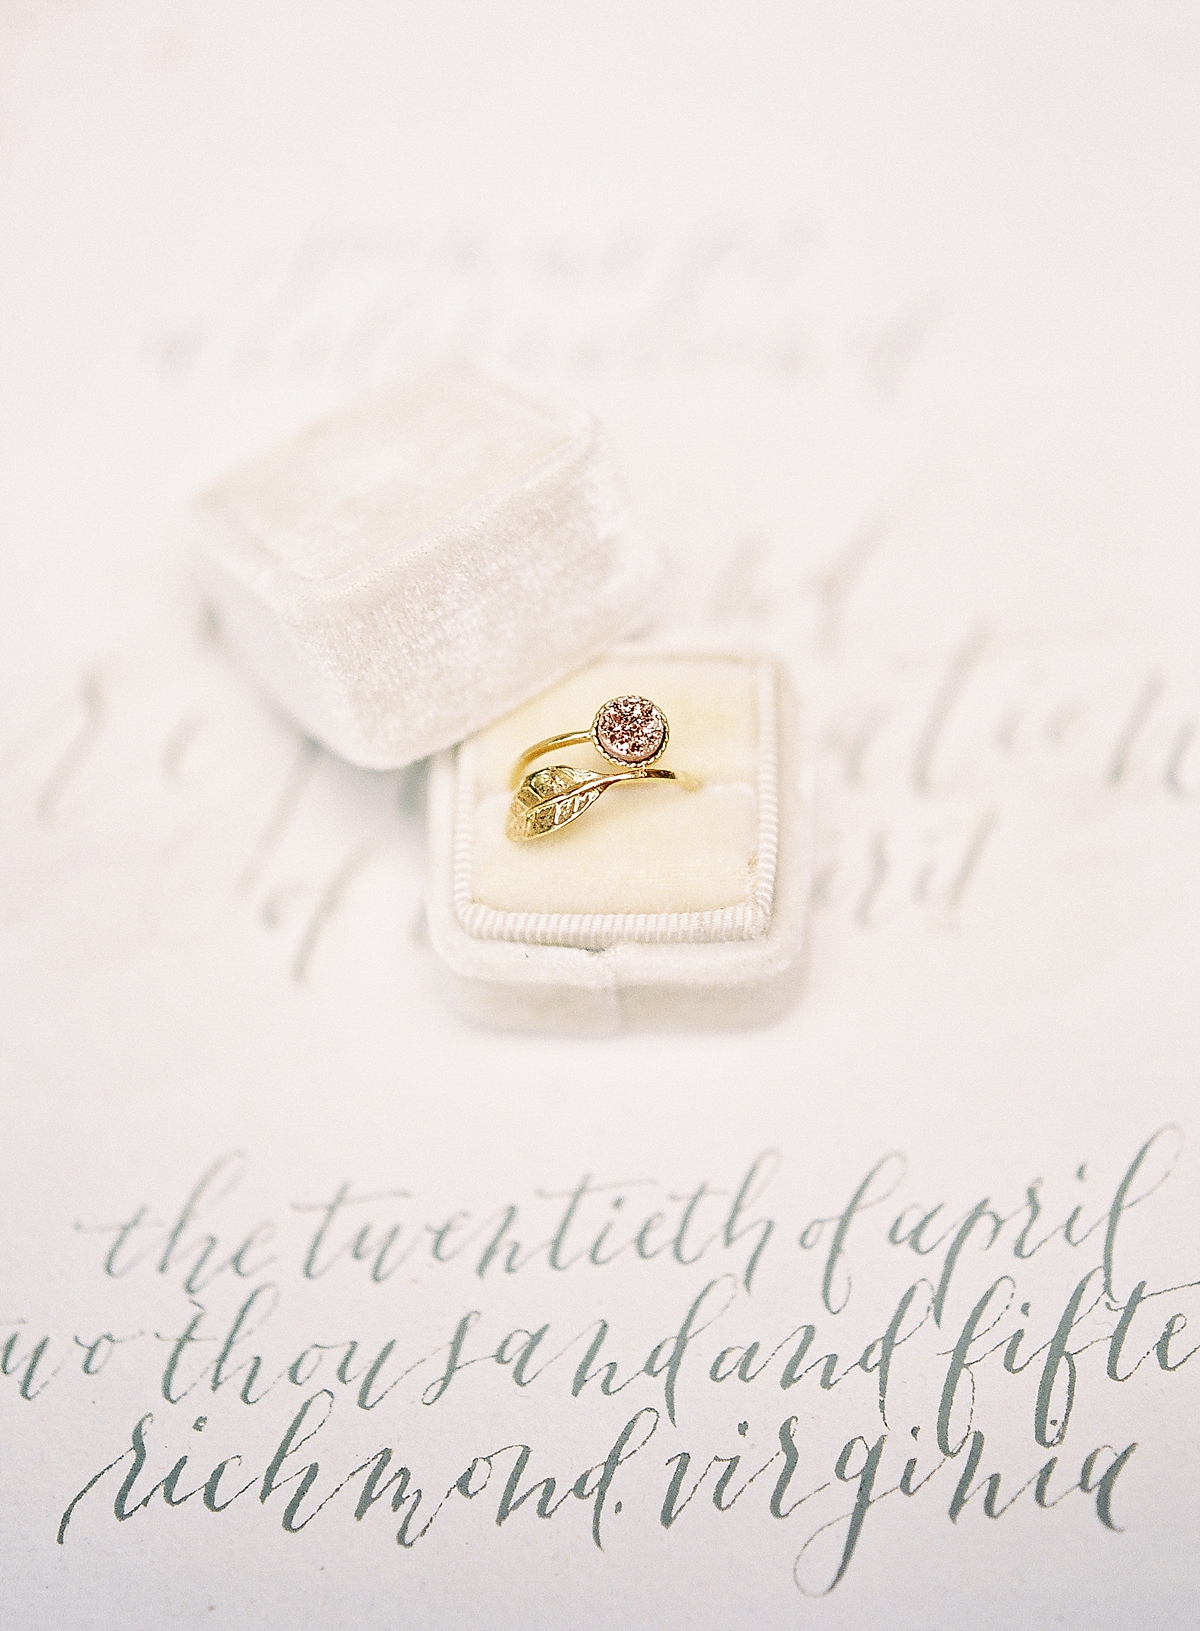 This Washington, DC wedding photographer shares three reasons why future brides should incorporate calligraphy for their invitation suite and various details.